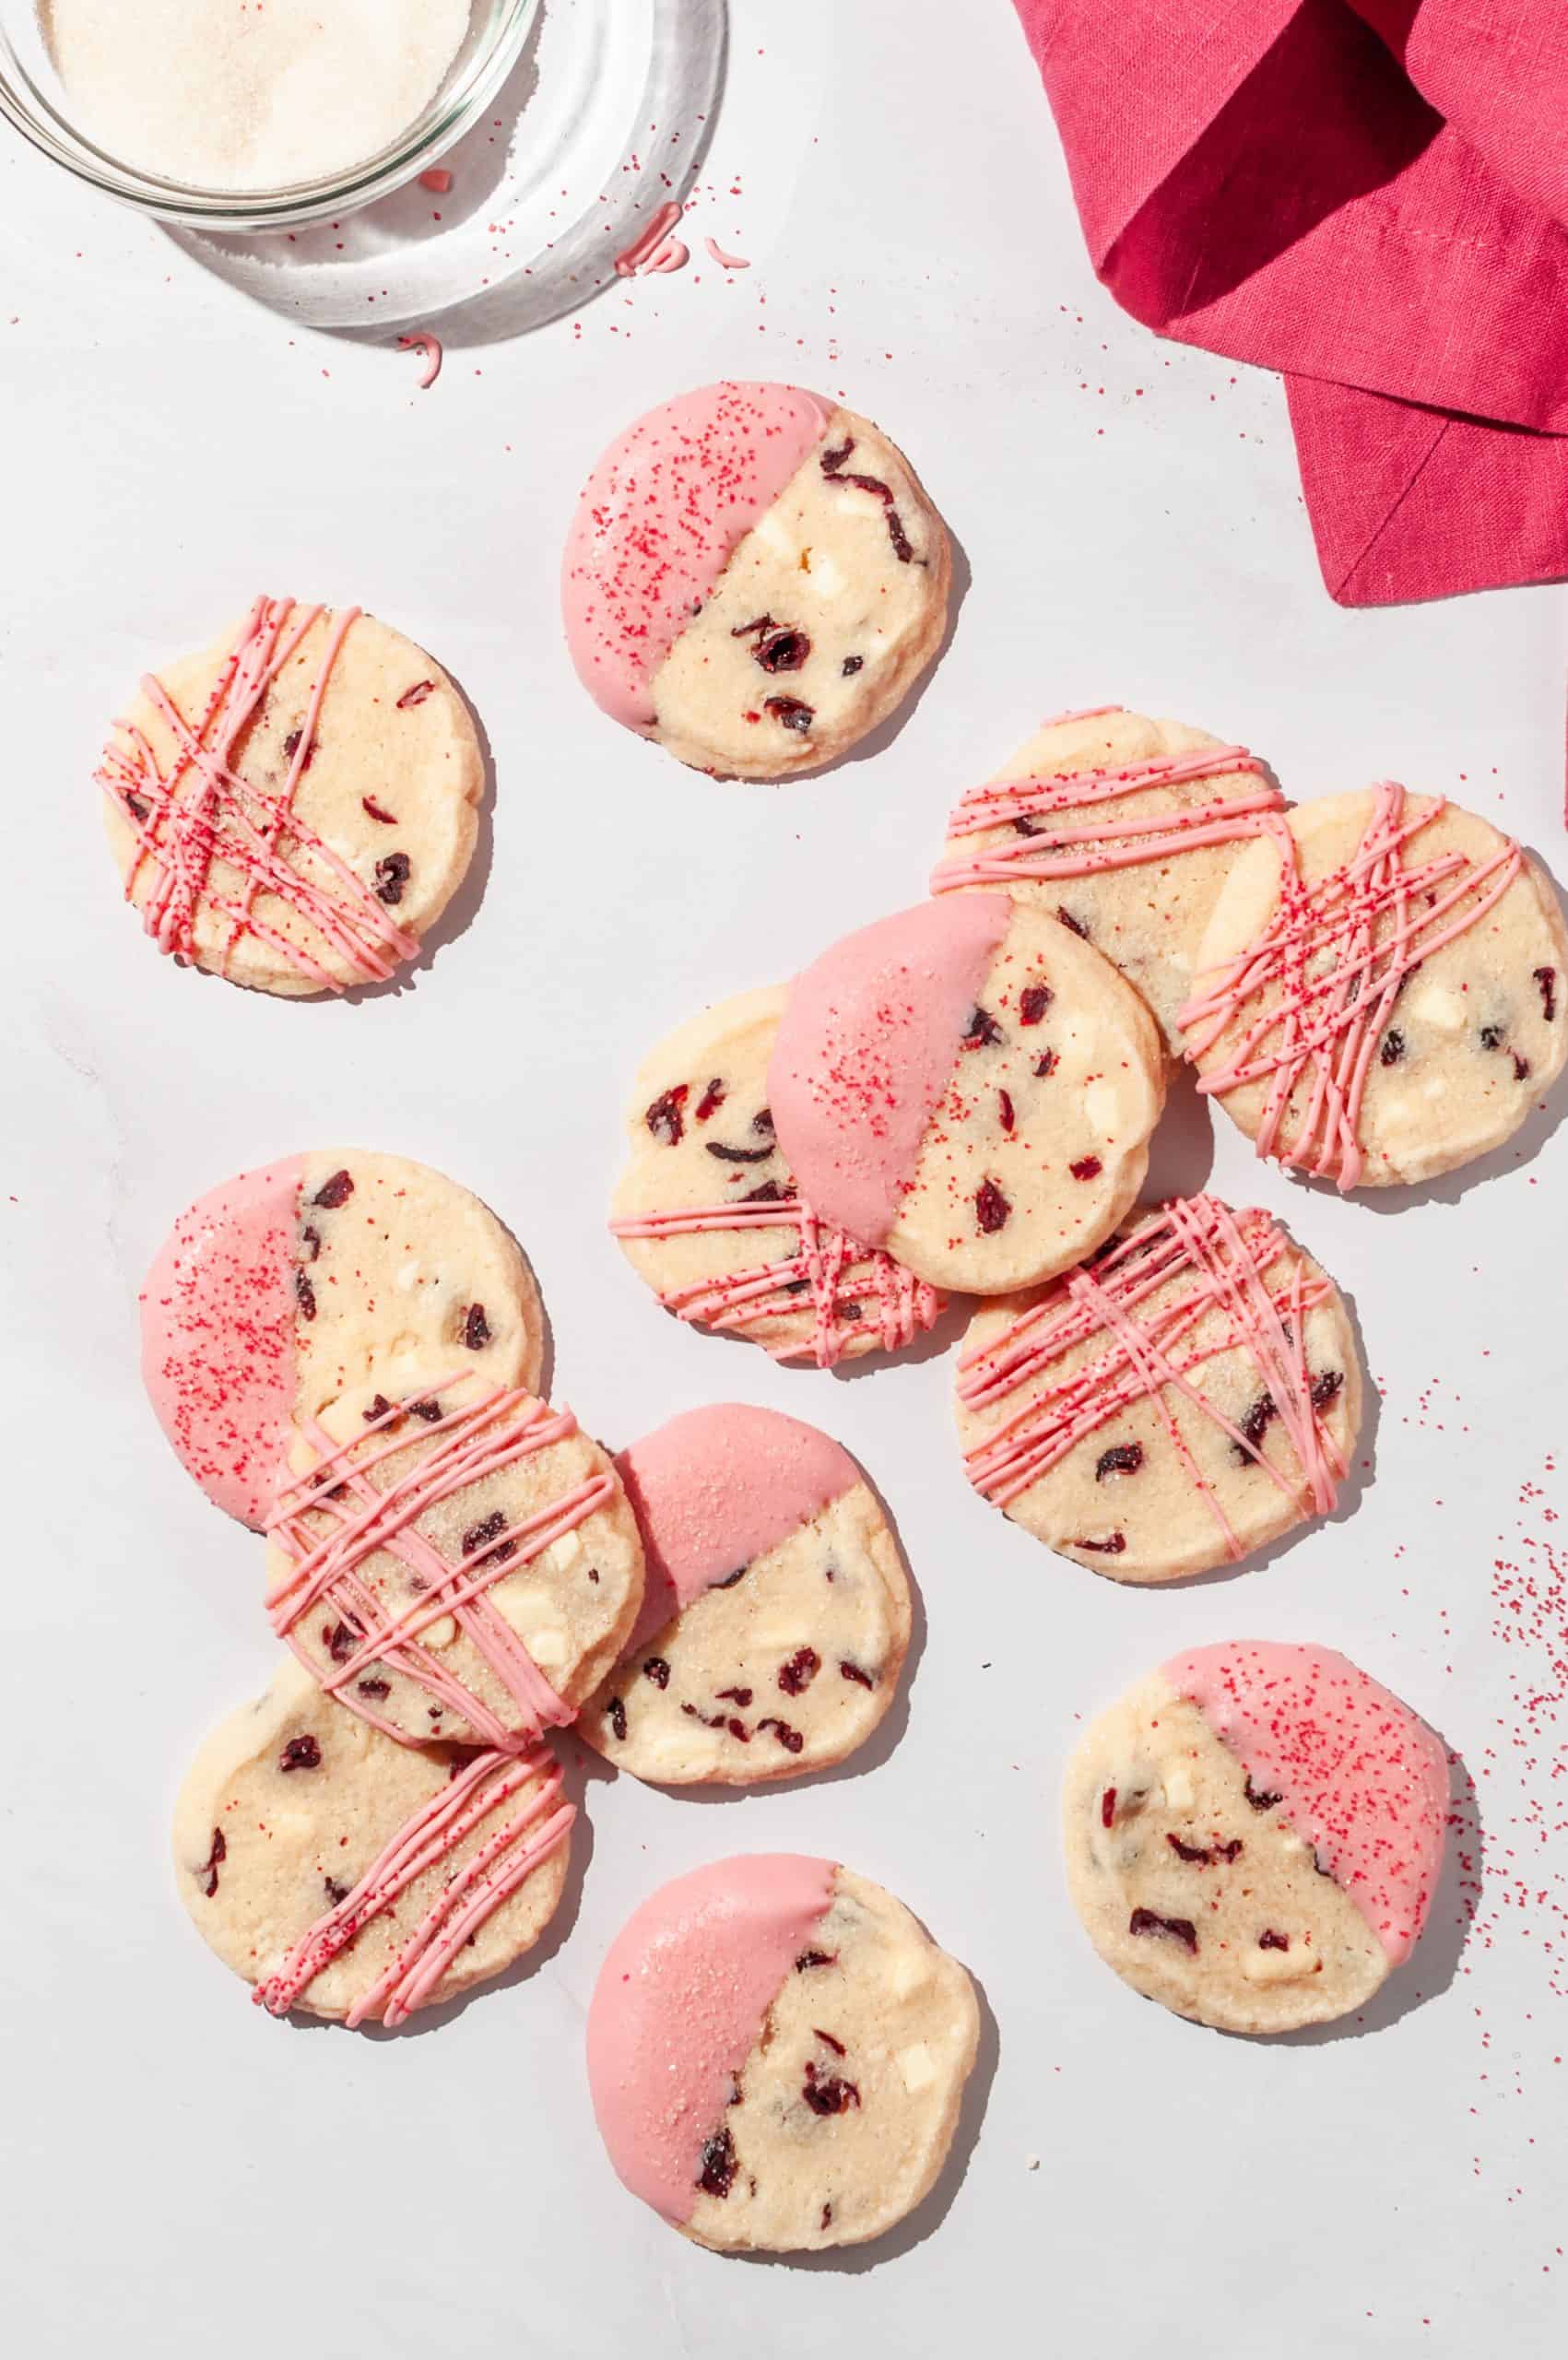 cranberry shortbread cookies decorated with pink white chocolate patterns and red sanding sugar